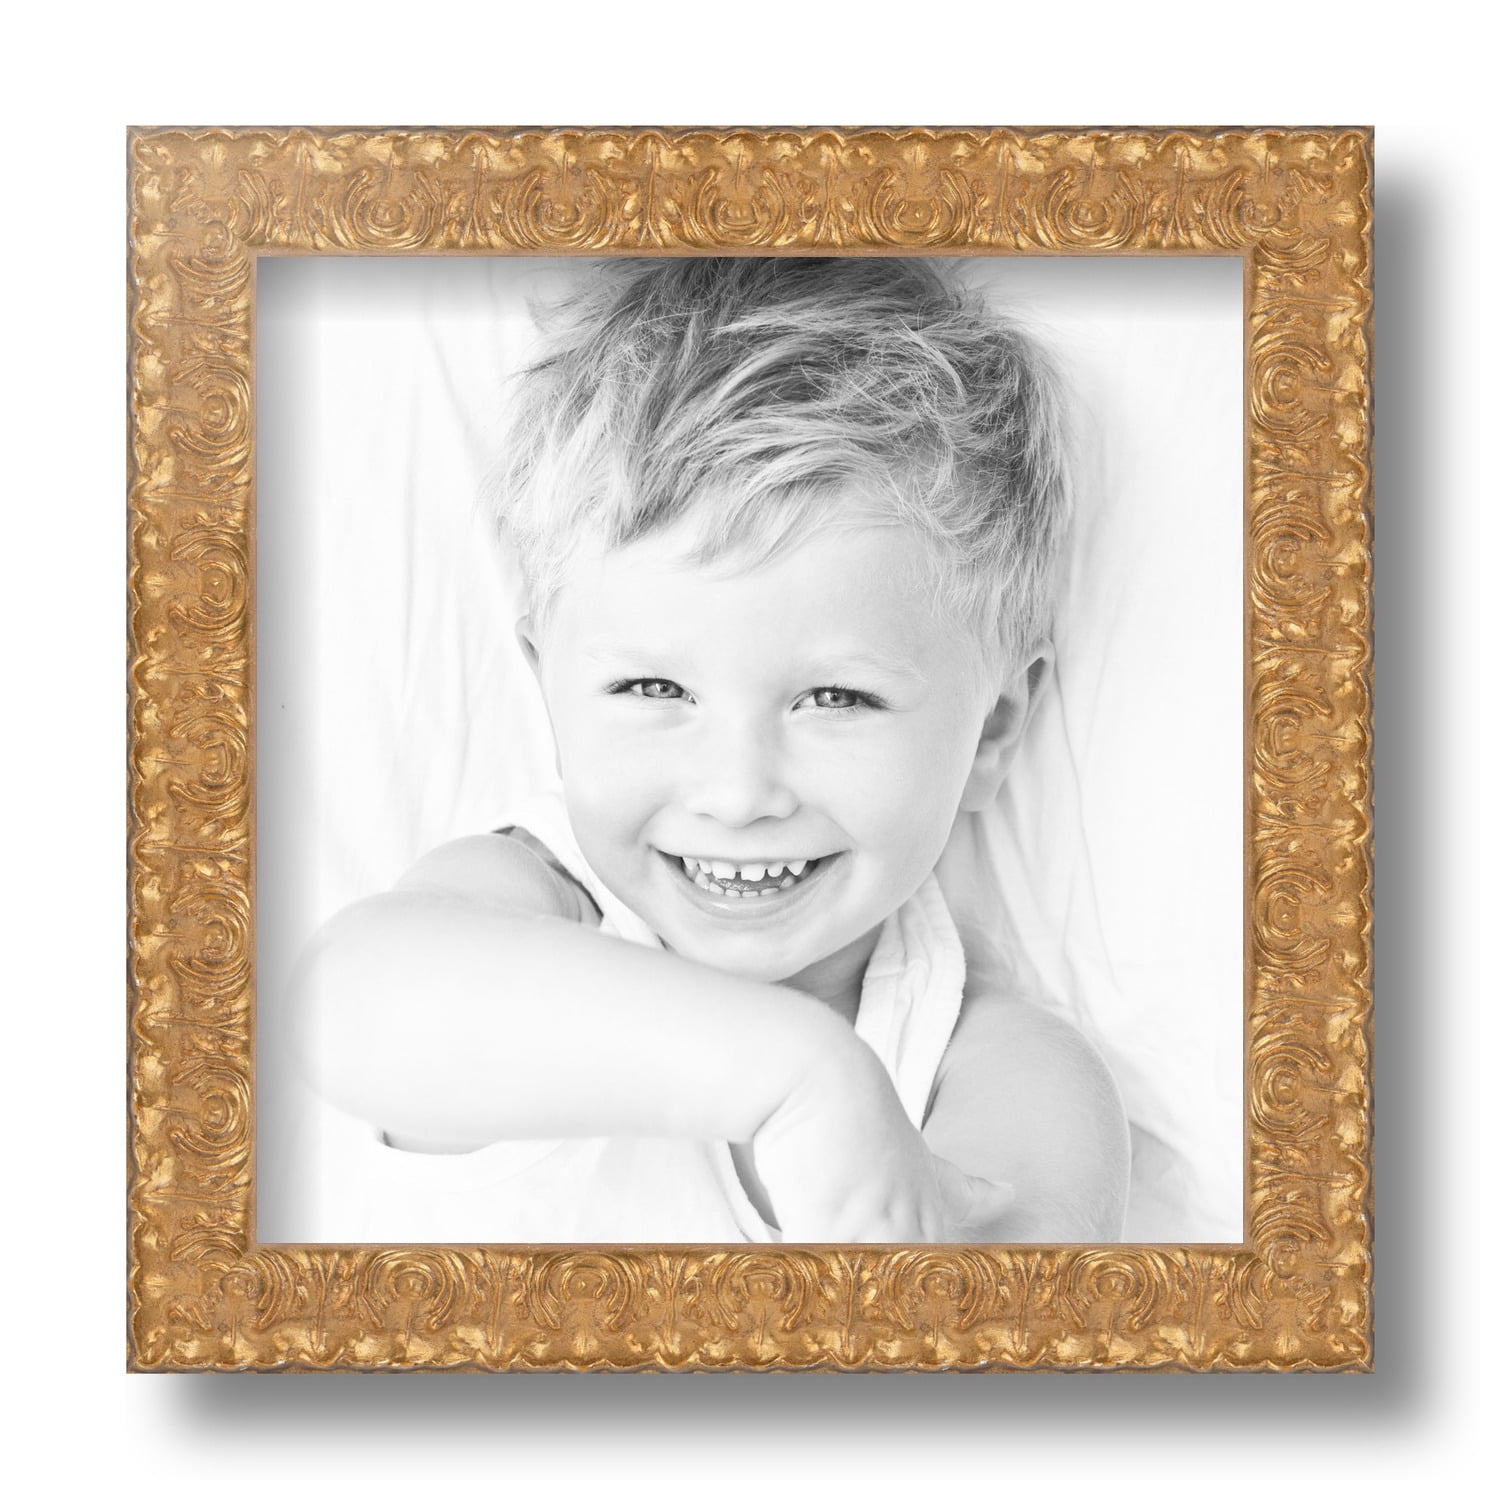 ArtToFrames 4x6 inch Gold Picture Frame, This Gold Wood Poster Frame Is Great for Your Art or Photos, Comes with Regular Glass (4901), Size: 4 x 6